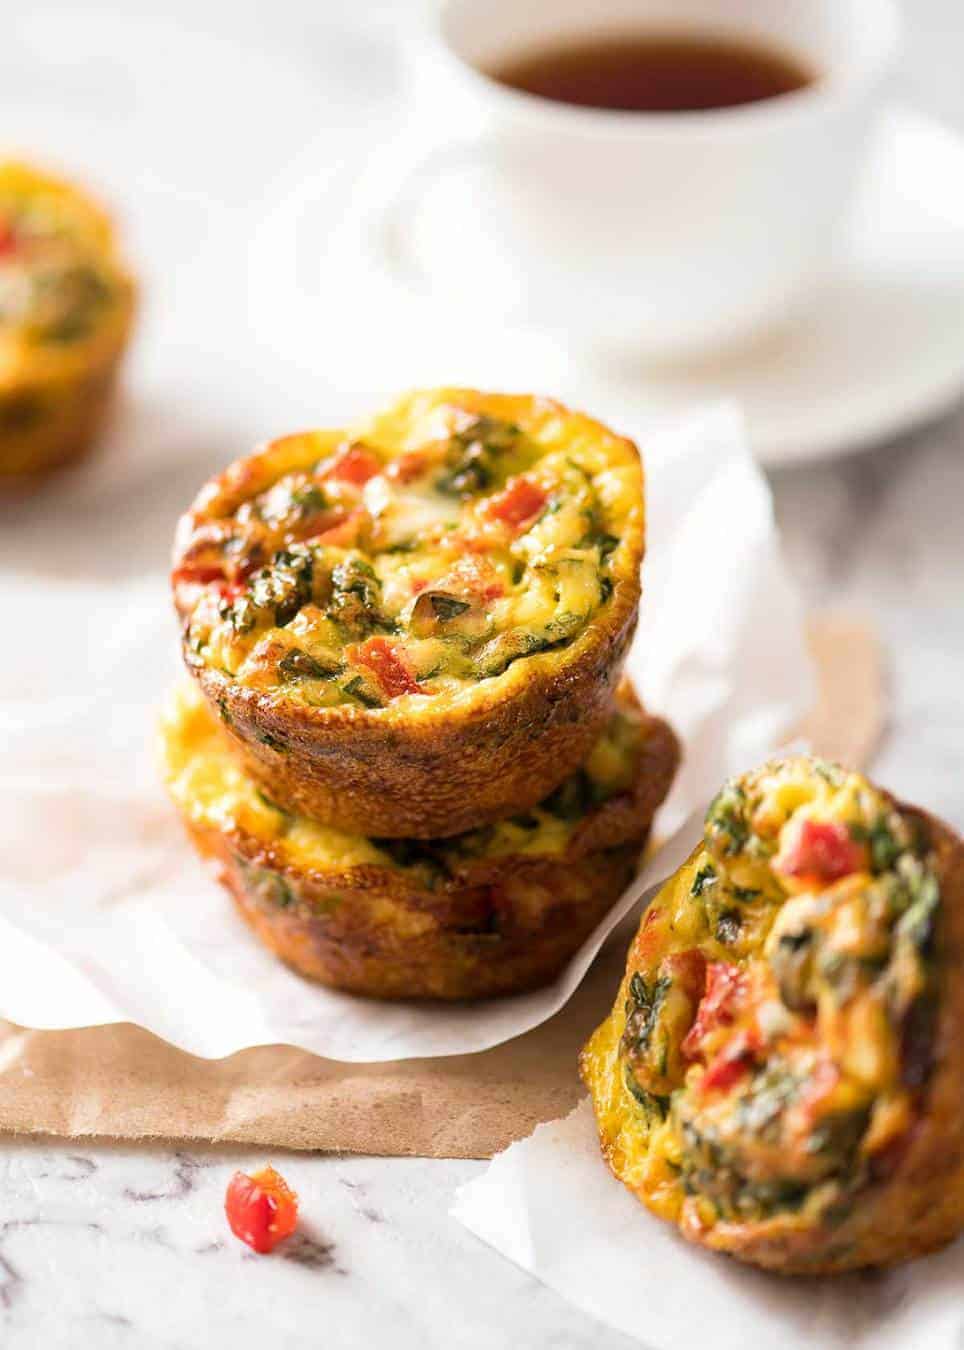 Healthy doesn't have to be bland! These Healthy Egg Muffins are a great grab & go breakfast option. Egg, spinach, feta, cherry tomatoes and bell peppers/capsicum. www.recipetineats.com